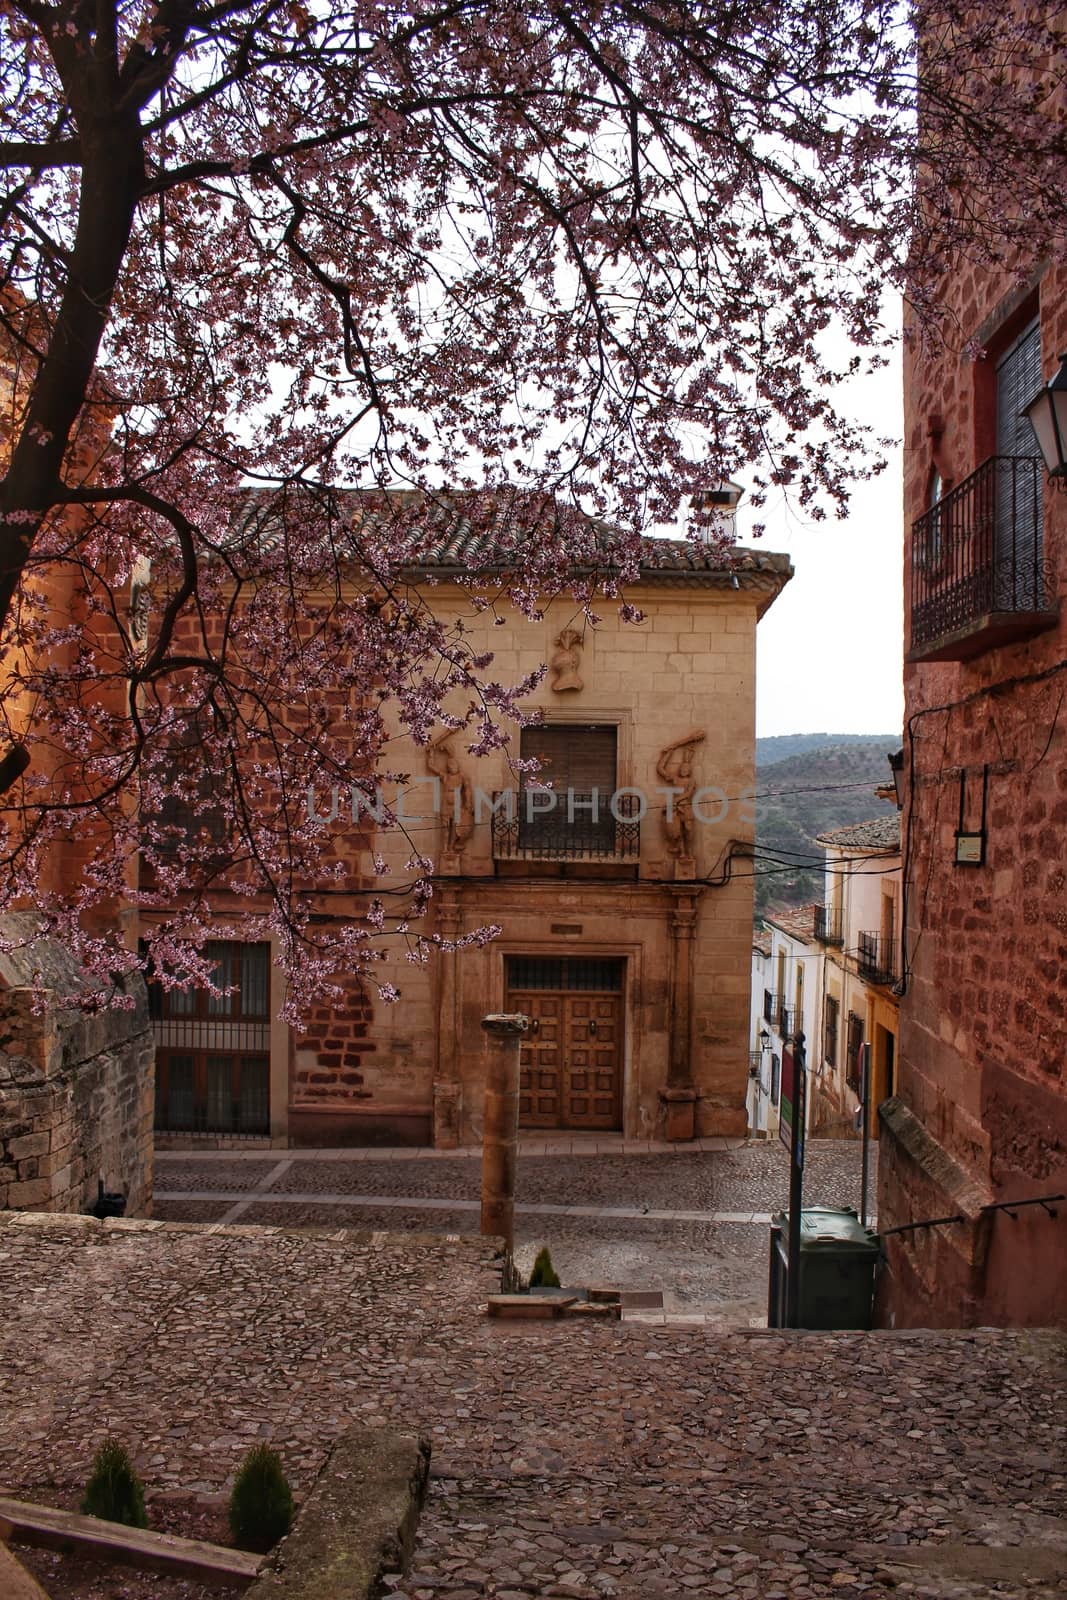 Cherry tree in bloom in a town square in Alcaraz by soniabonet